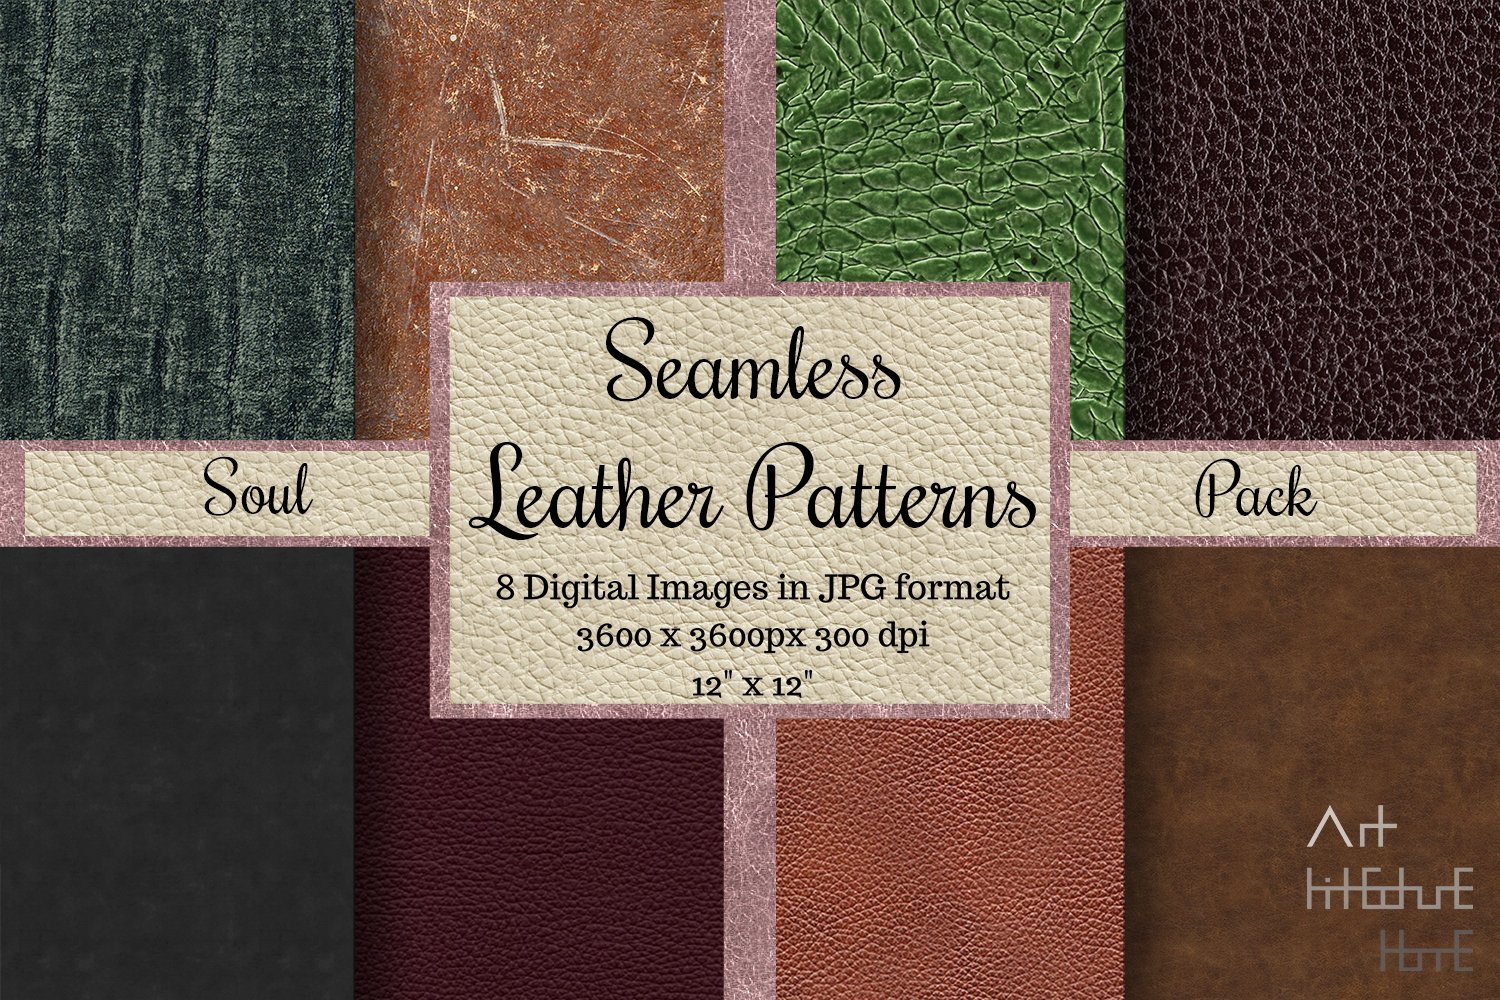 Seamless Leather Patterns Soul Pack cover image.